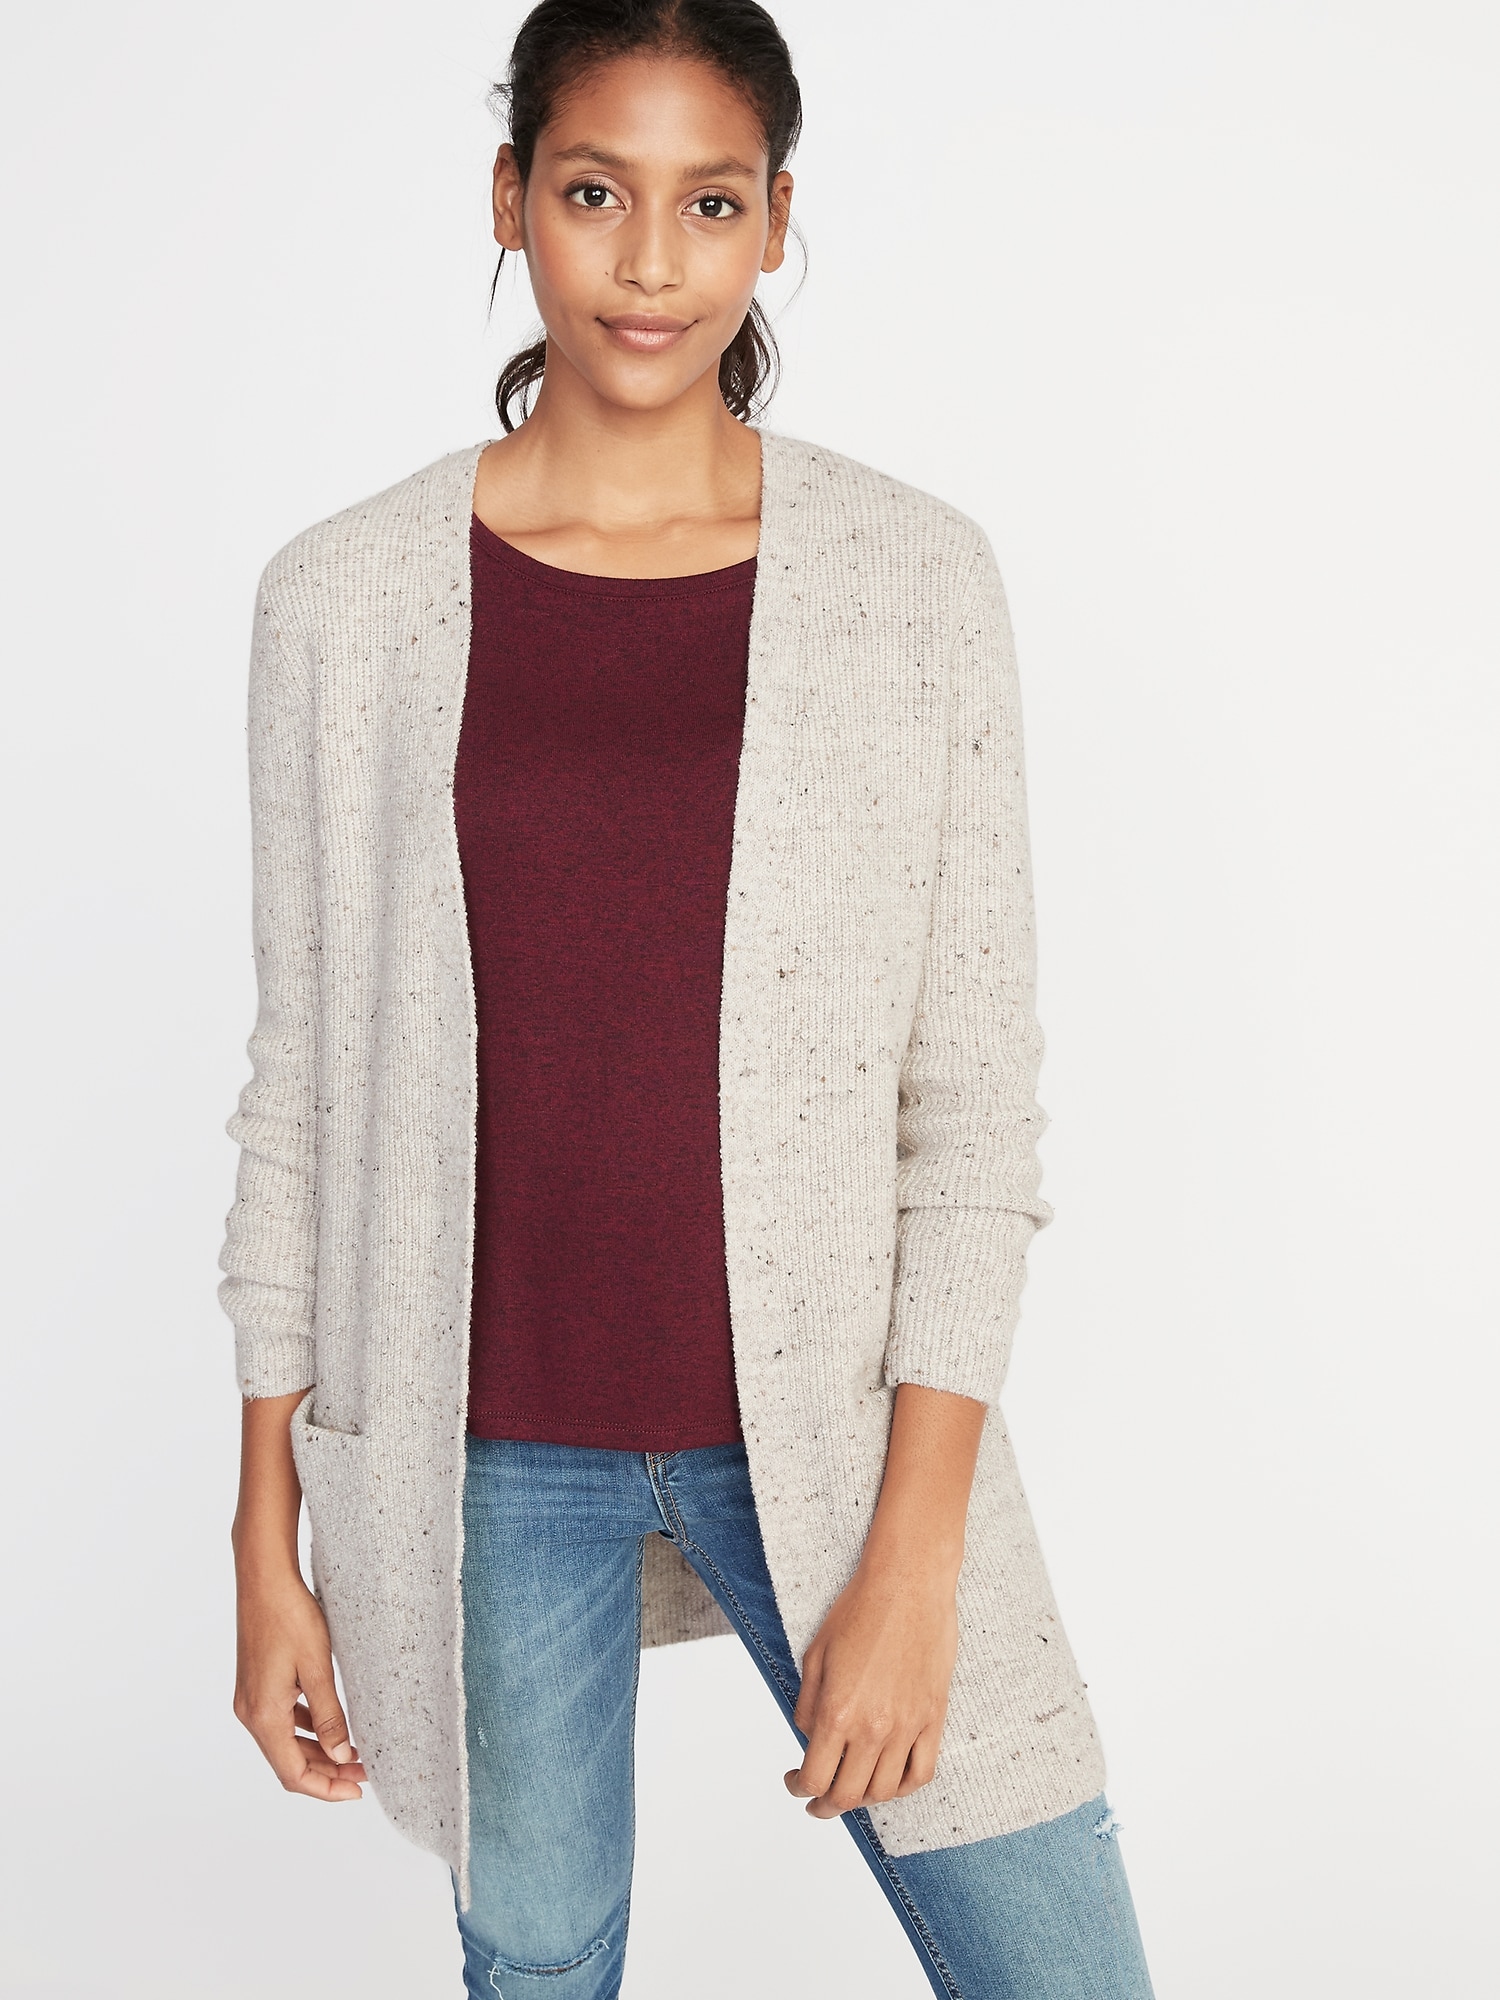 Old Navy - Shaker-Stitch Long-Line Open-Front Sweater for Women gray